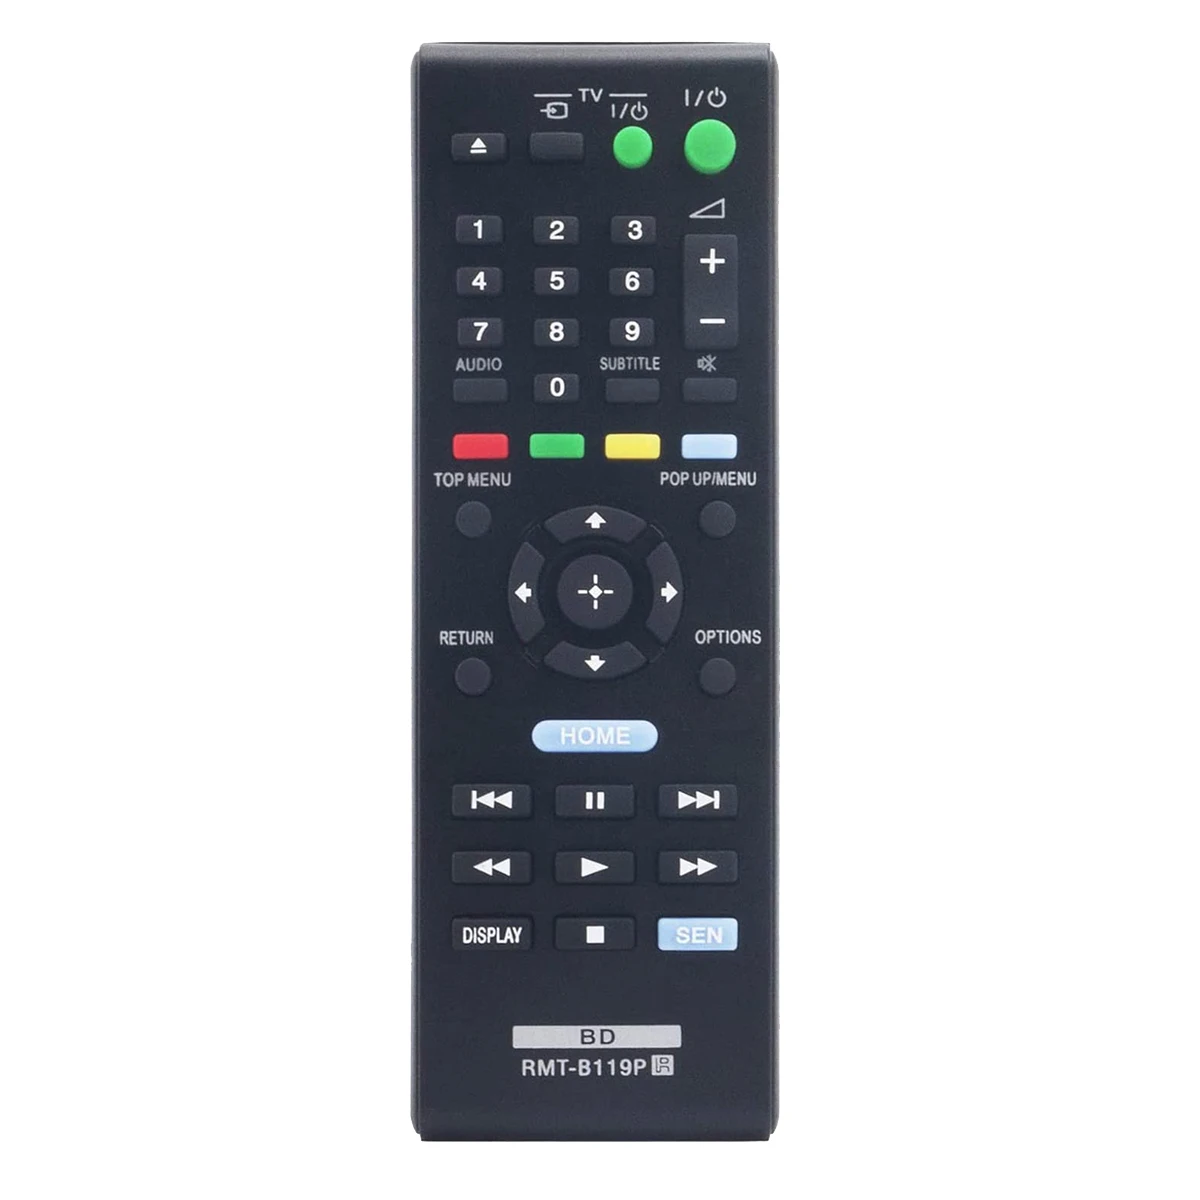 

RMT-B119P Remote Control for Sony Blu-Ray Recorder Disc DVD Player BDPS490 BDPS1100 BDPS590 BDPS5100 BDP-S390 BDP-S190